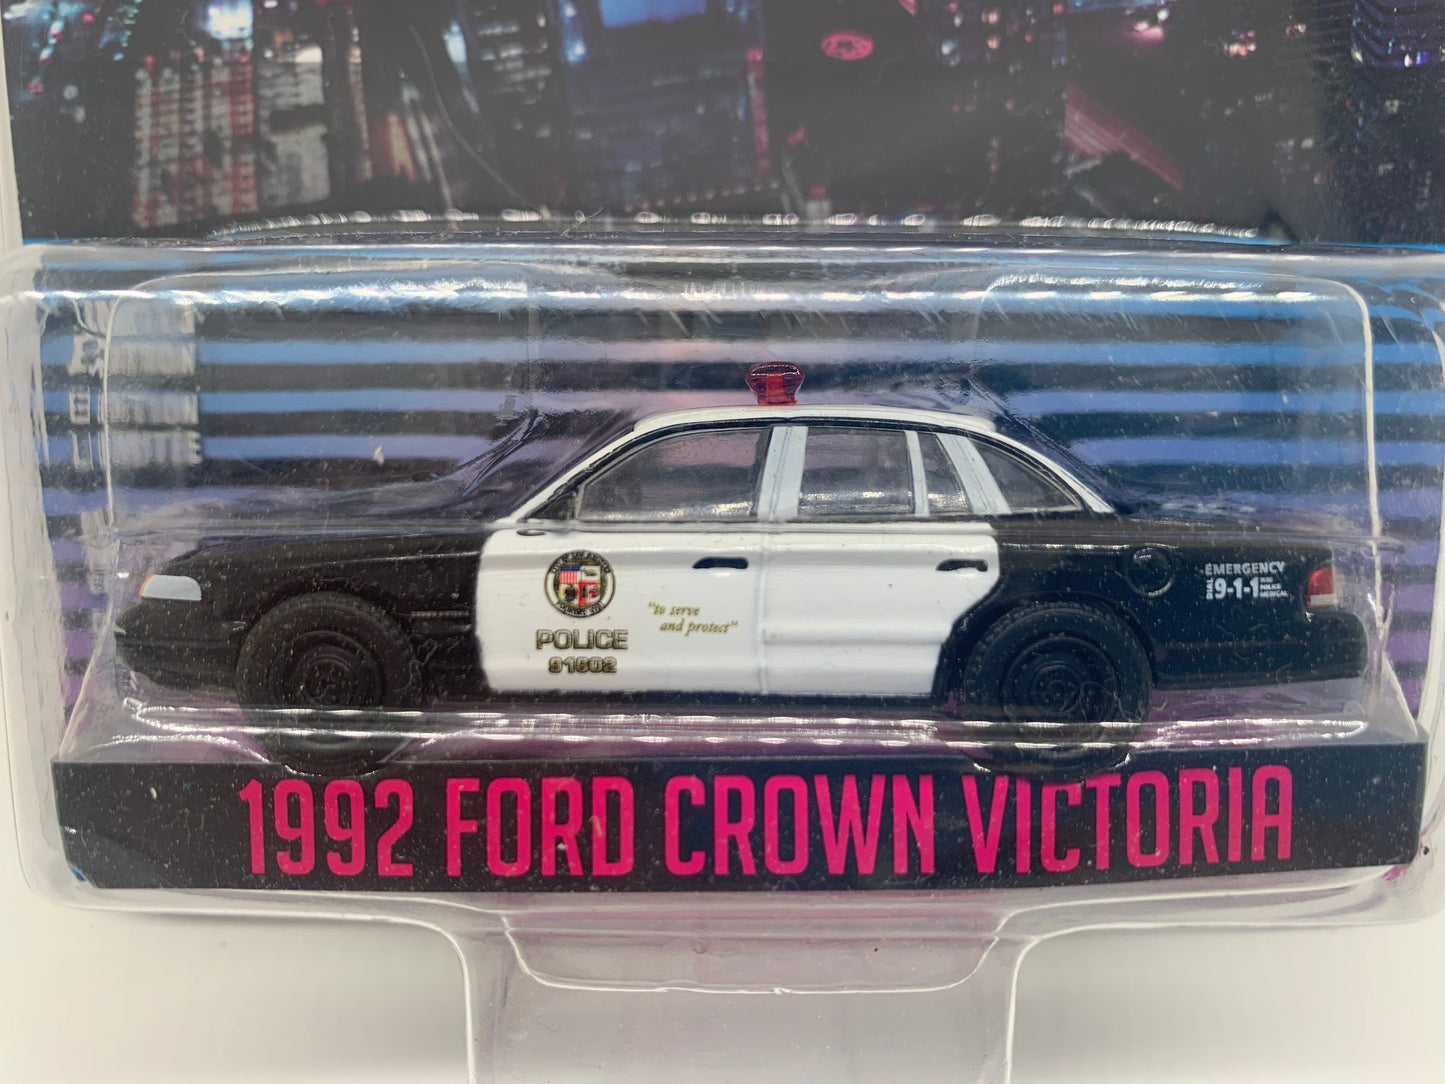 1992 Ford Crown Victoria - Drive Police Car - Diecast Vintage - Hollywood Collectible - Greenlight Car - Greenlight - Miniature Model Car